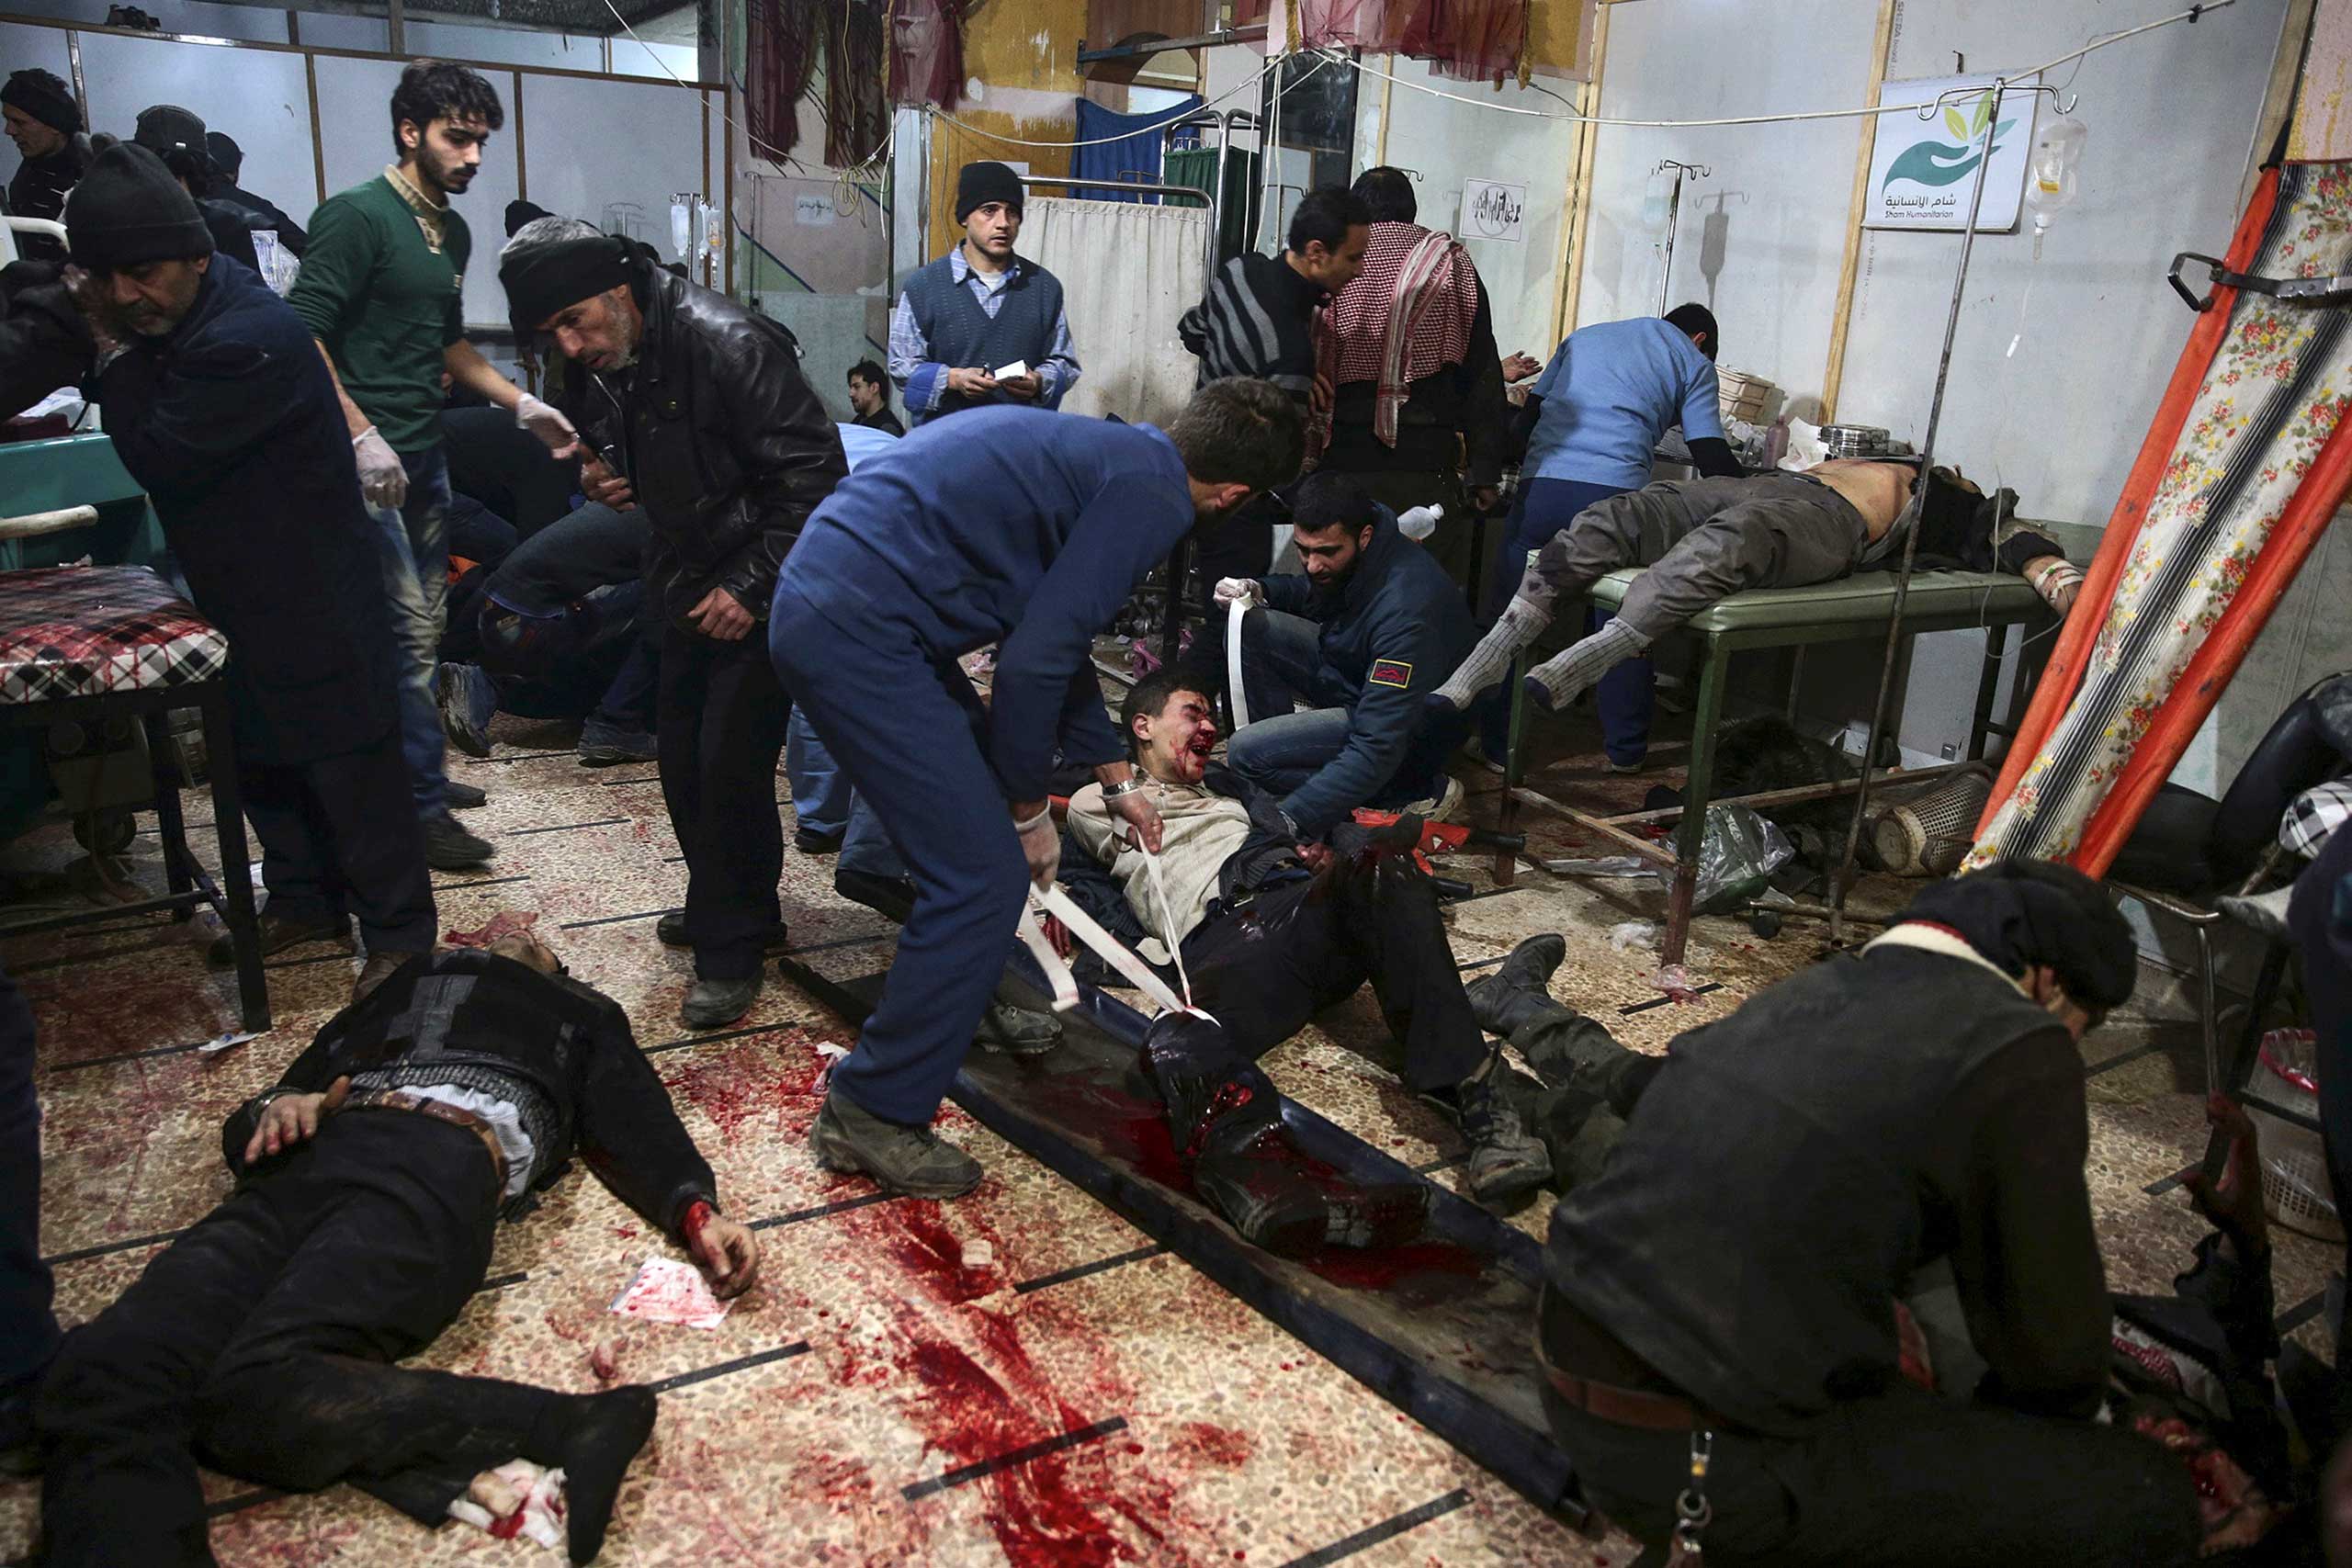 Medics treat injured people inside a field hospital after what activists said were air and missile strikes in the Douma neighborhood of Damascus, Syria, Dec. 13, 2015.